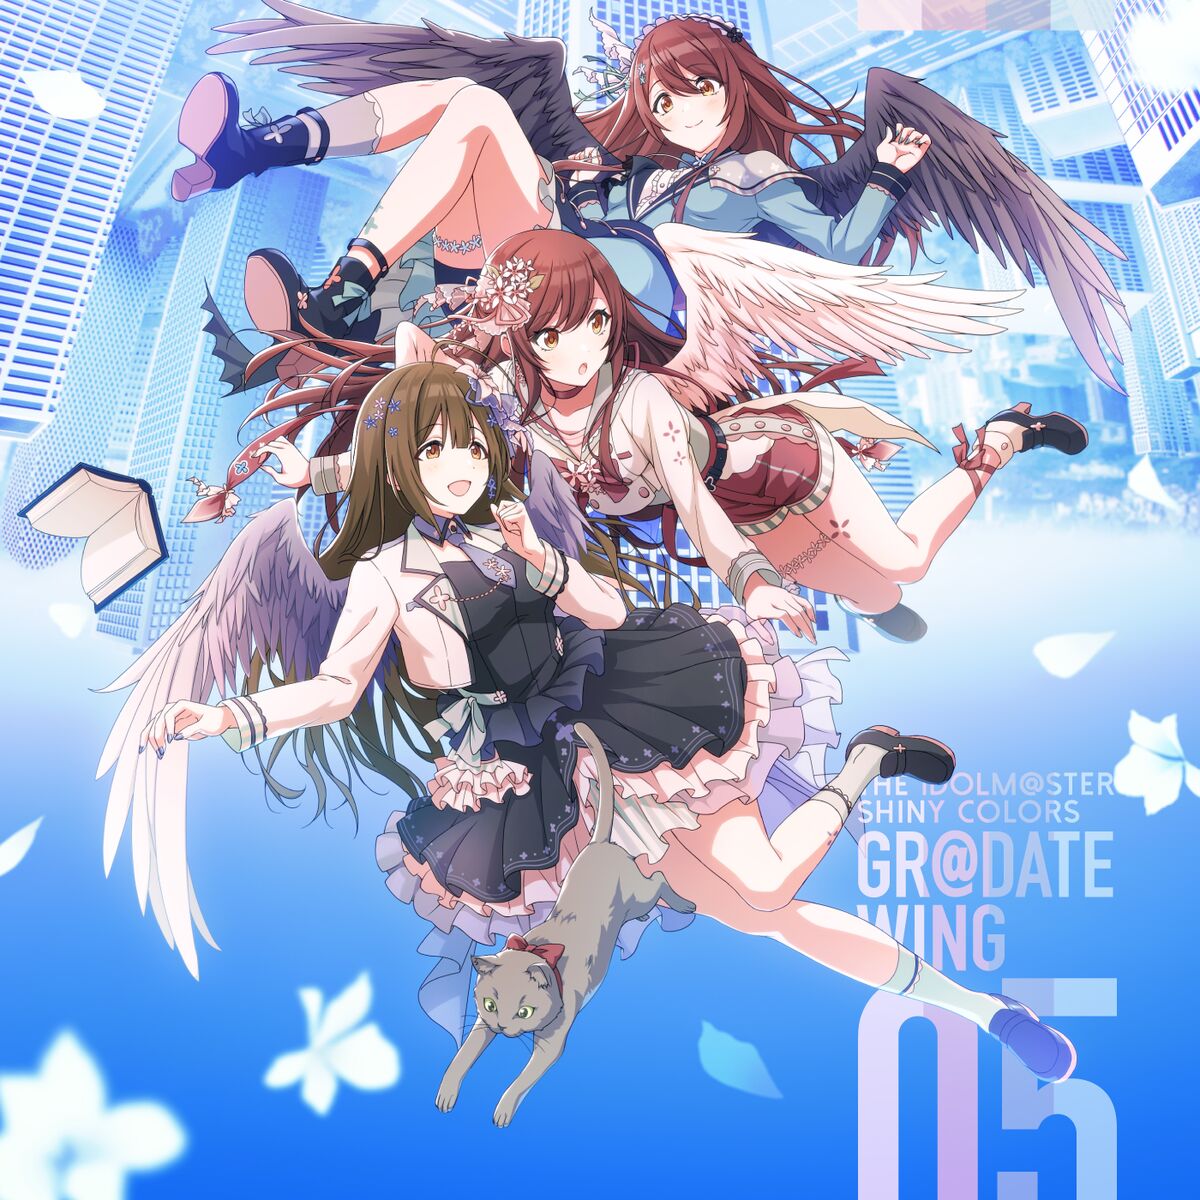 THE IDOLM@STER SHINY COLORS GR@DATE WING 05 - Shinycolors Wiki